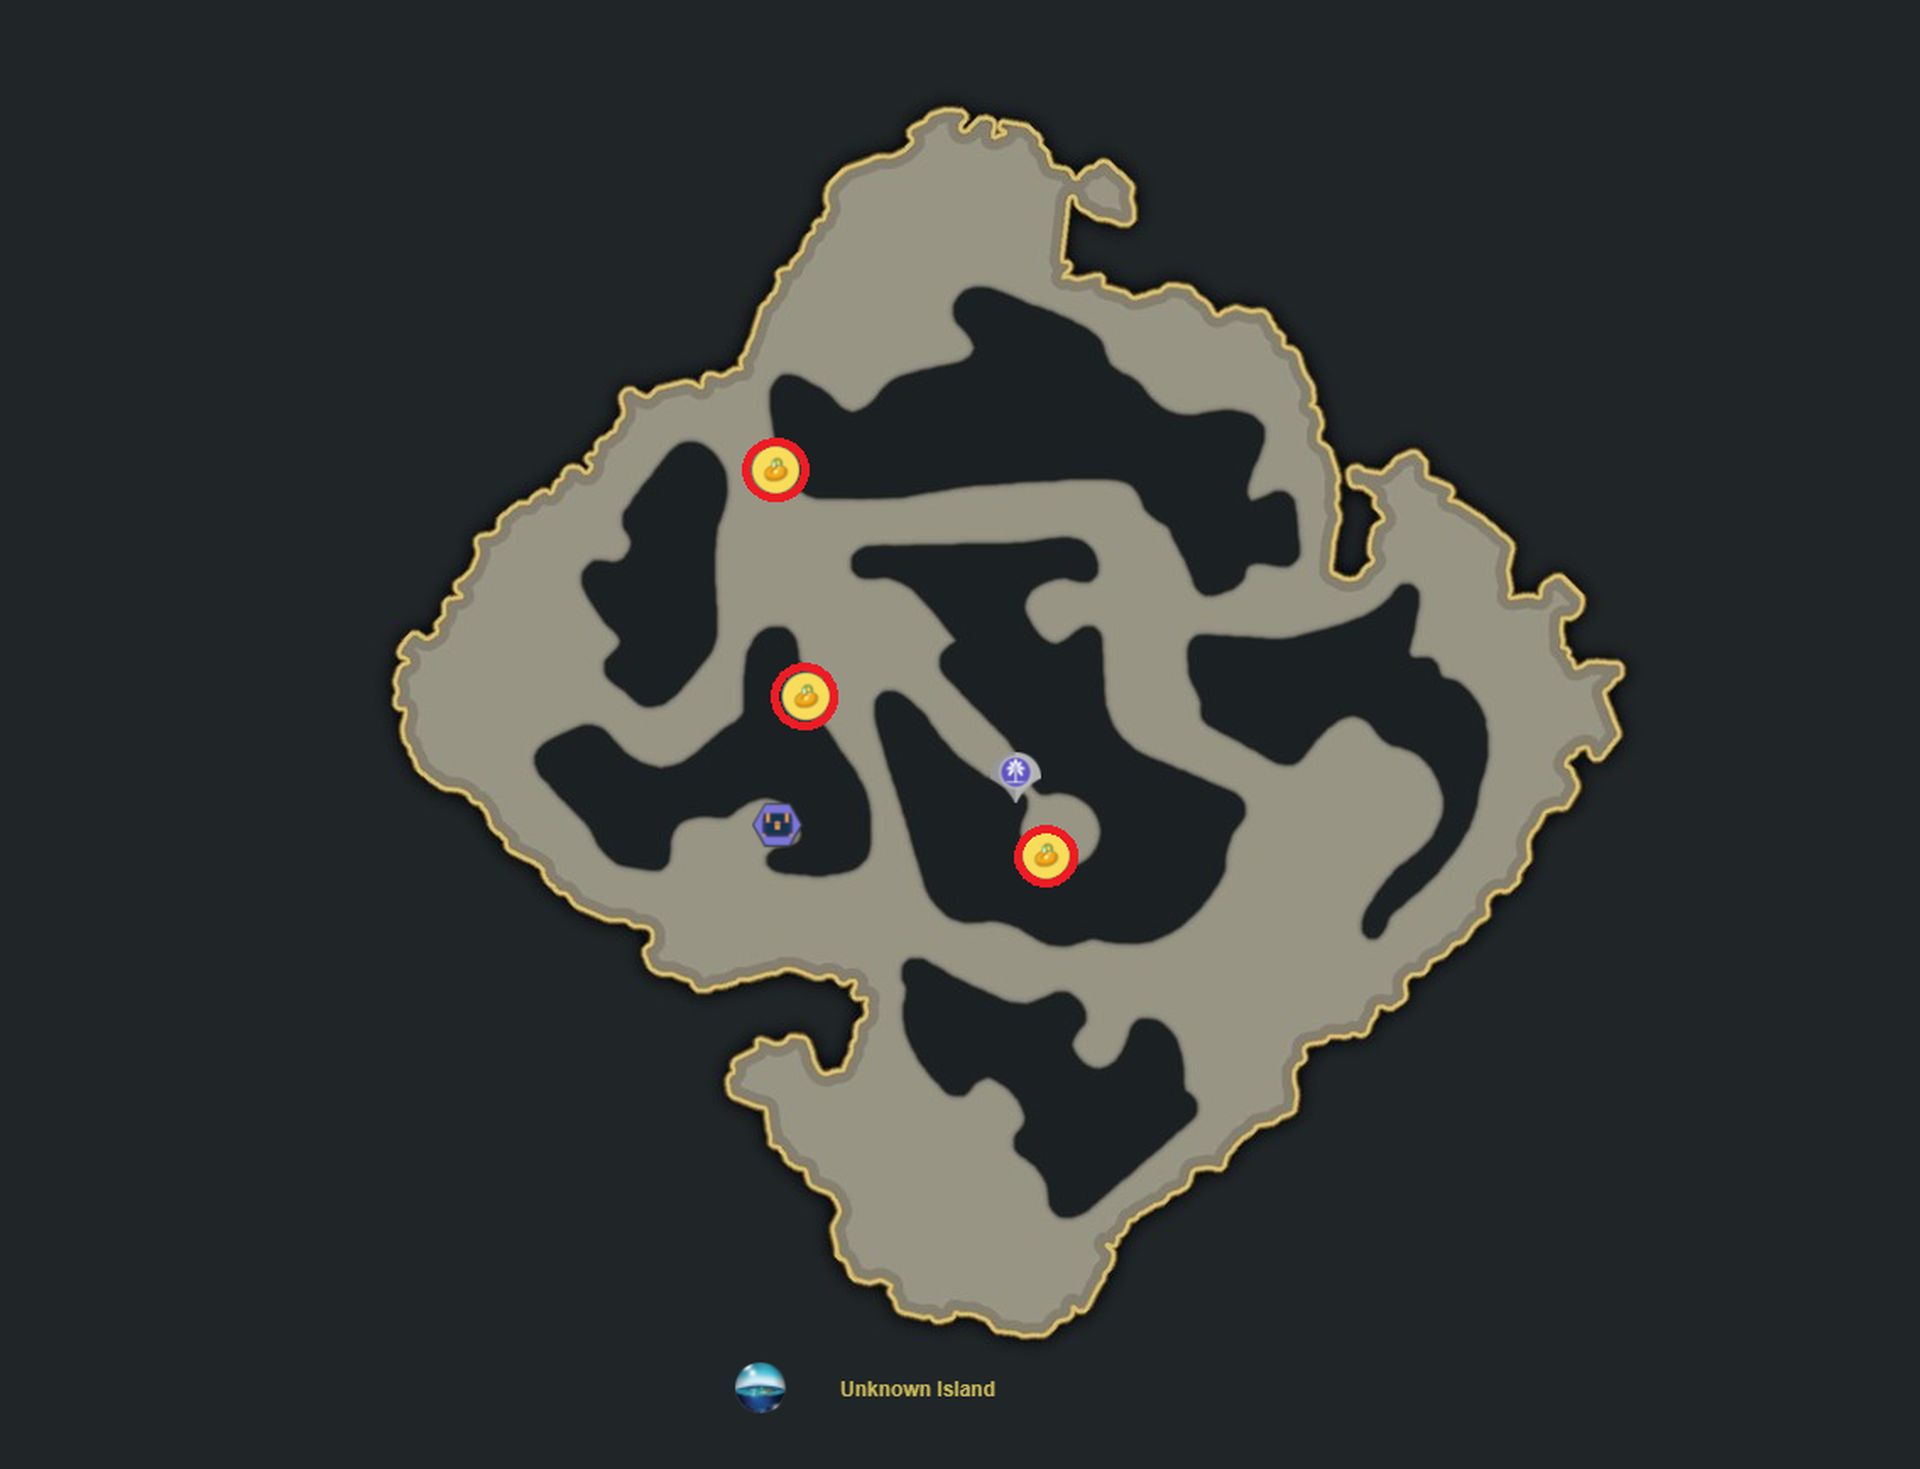 For those looking for a guide on the Lost Ark Unknown Island, here we'll cover the location, Island Token, Mokoko Seeds, so you know what is in store.